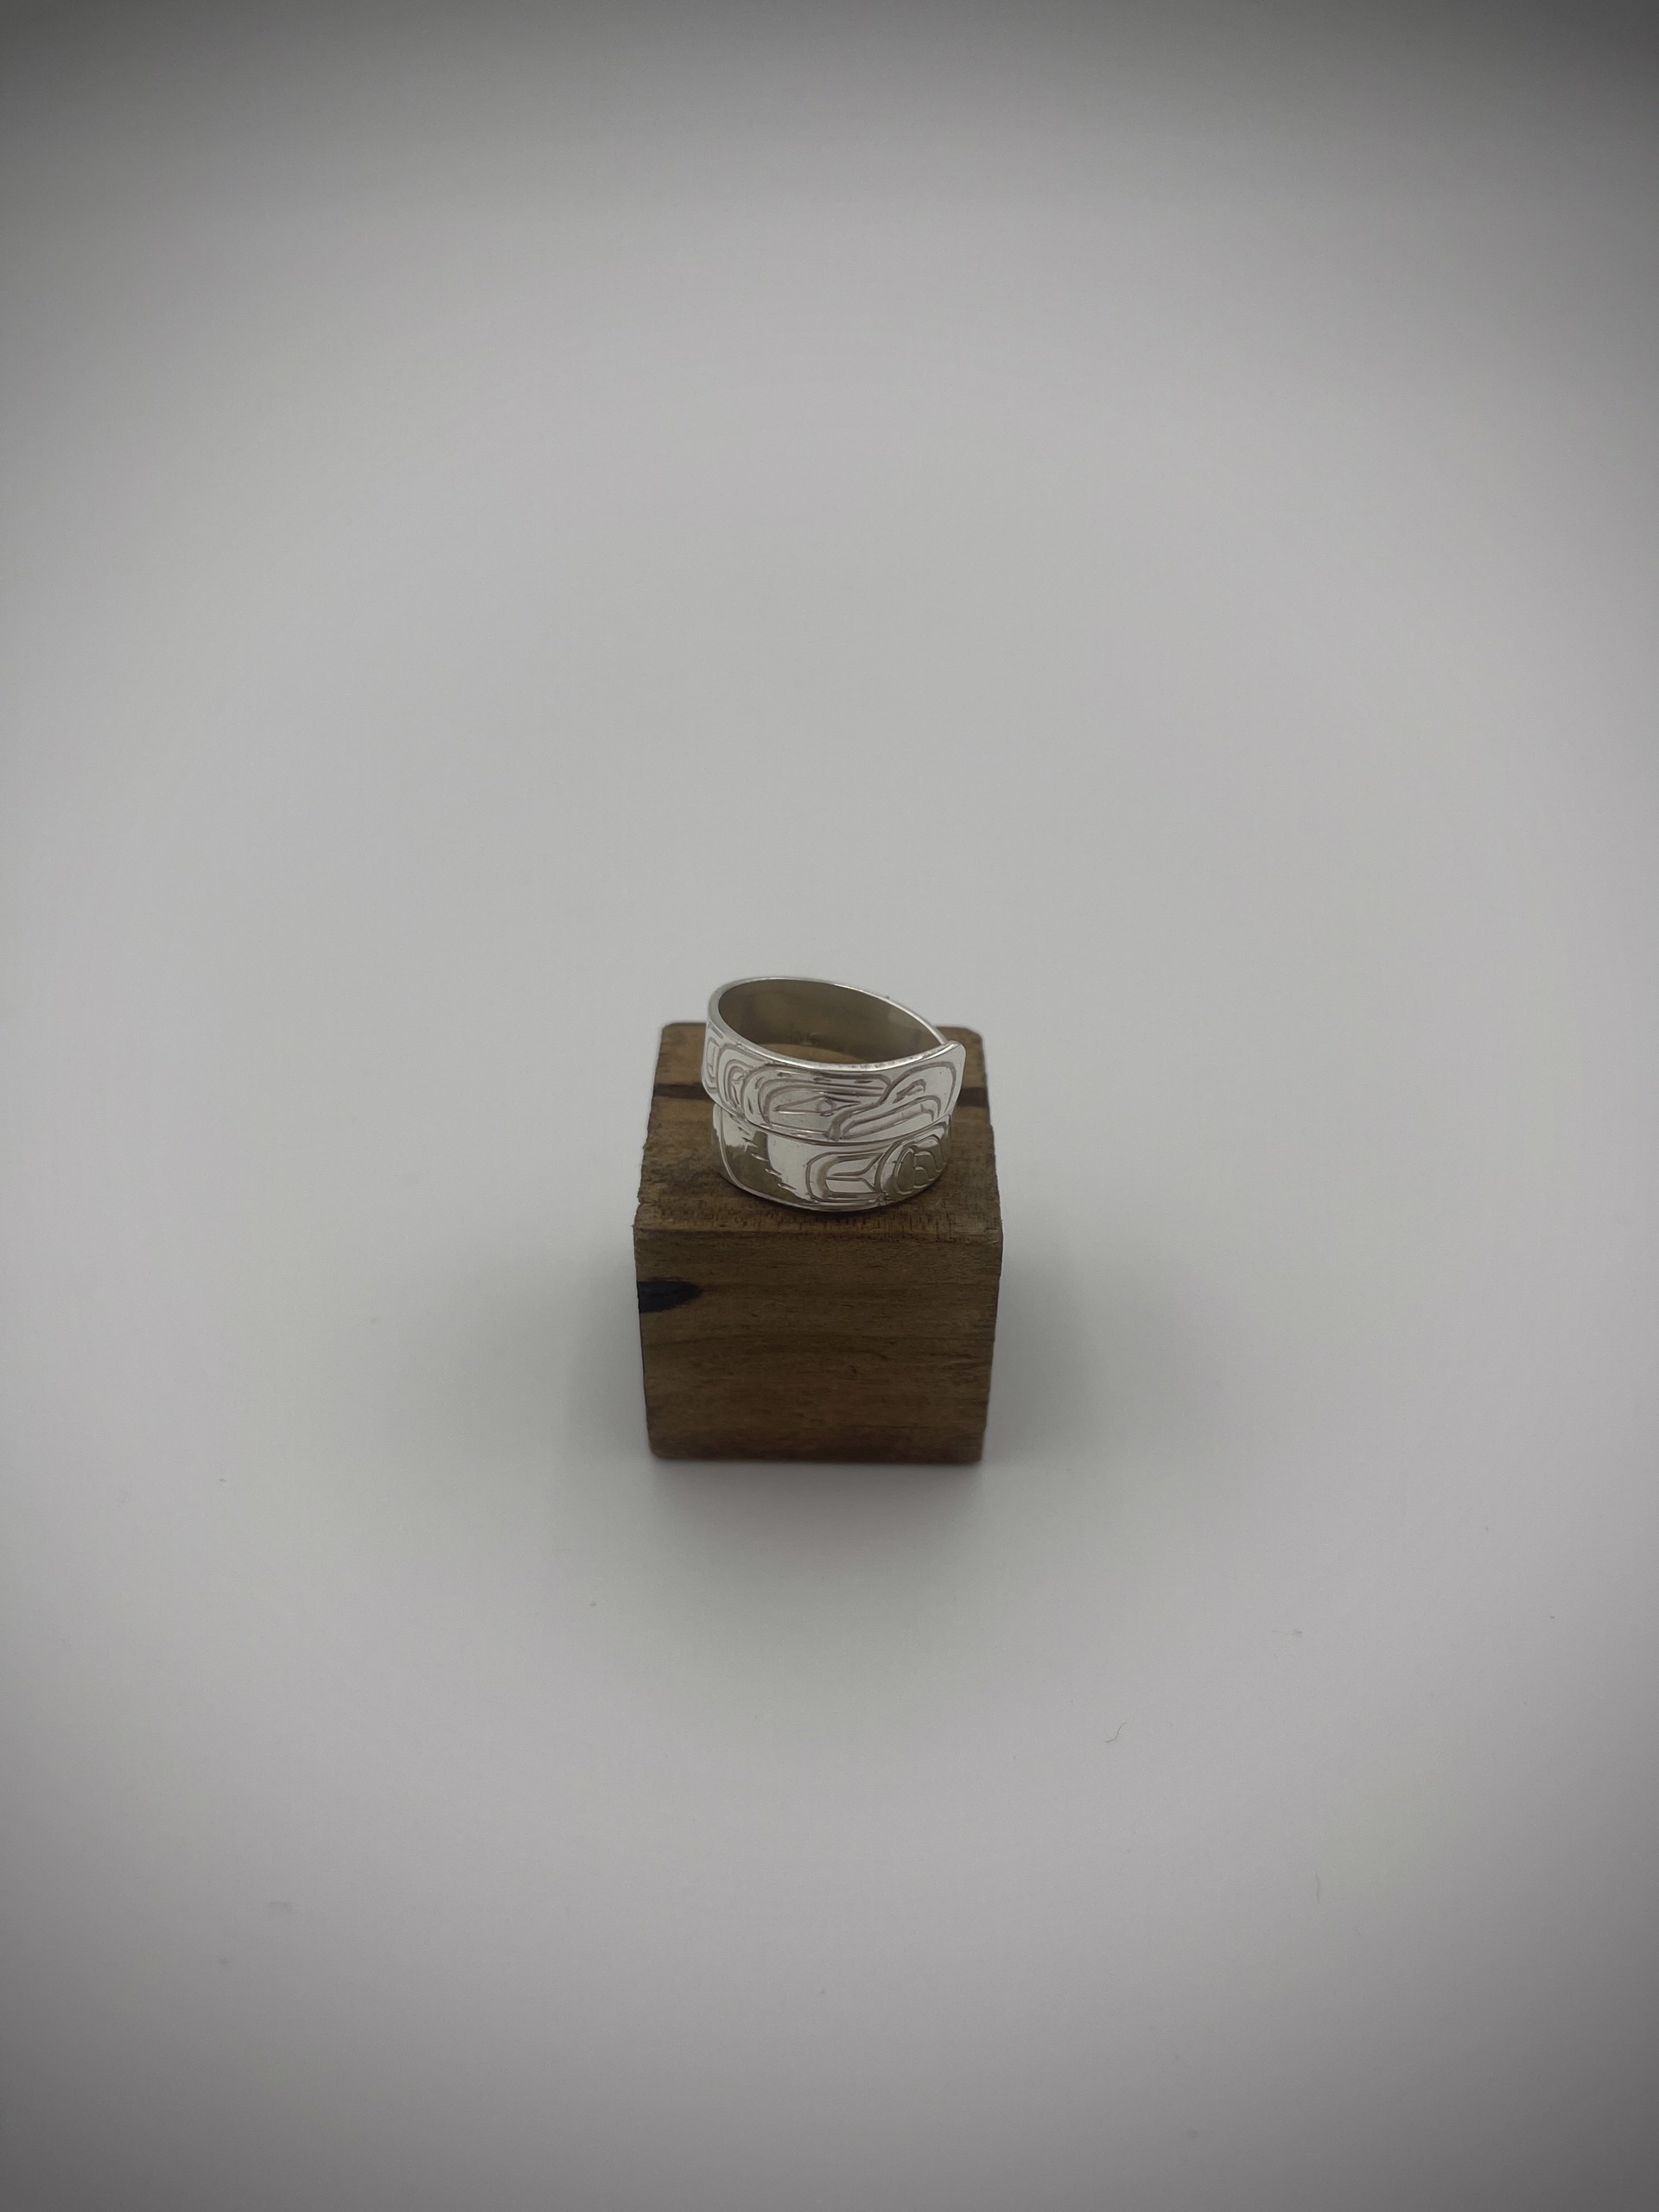 Eagle Wrap Ring by William Cook